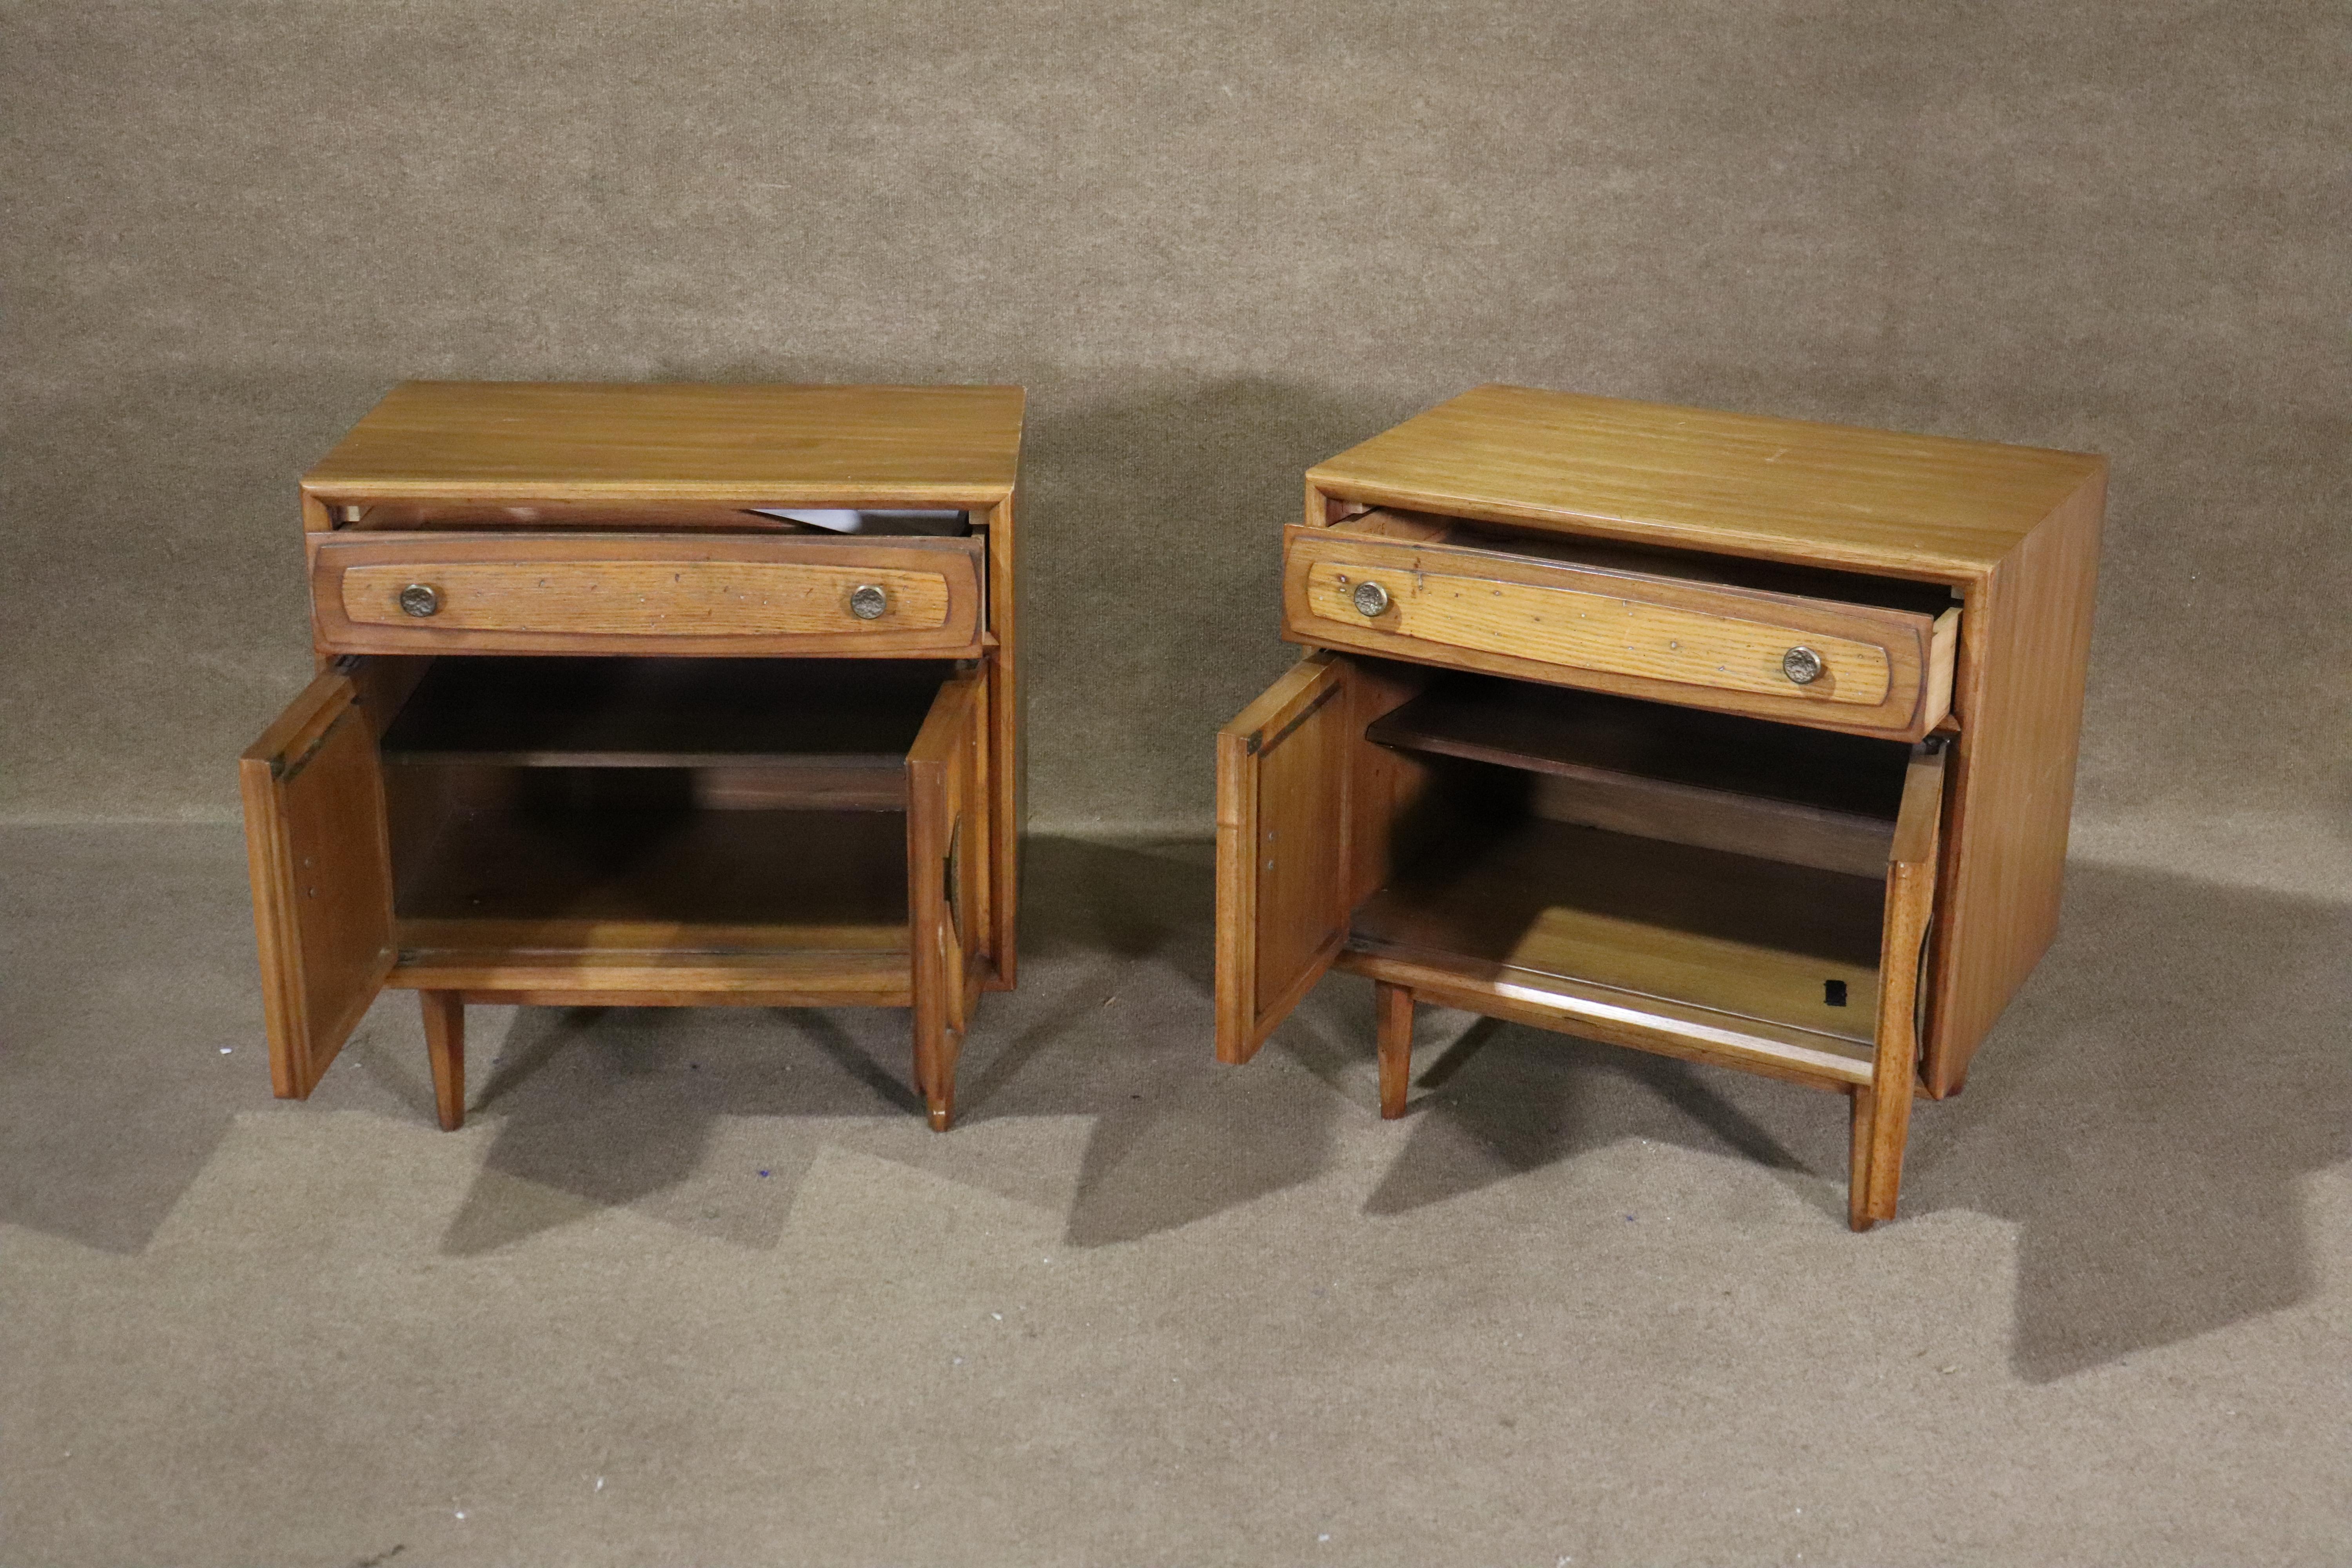 Vintage nightstands in walnut wood with brutalist style metal handles. Made by Heritage for their Perennian Collection. Single drawer and two door cabinet storage.
Please confirm location NY or NJ.